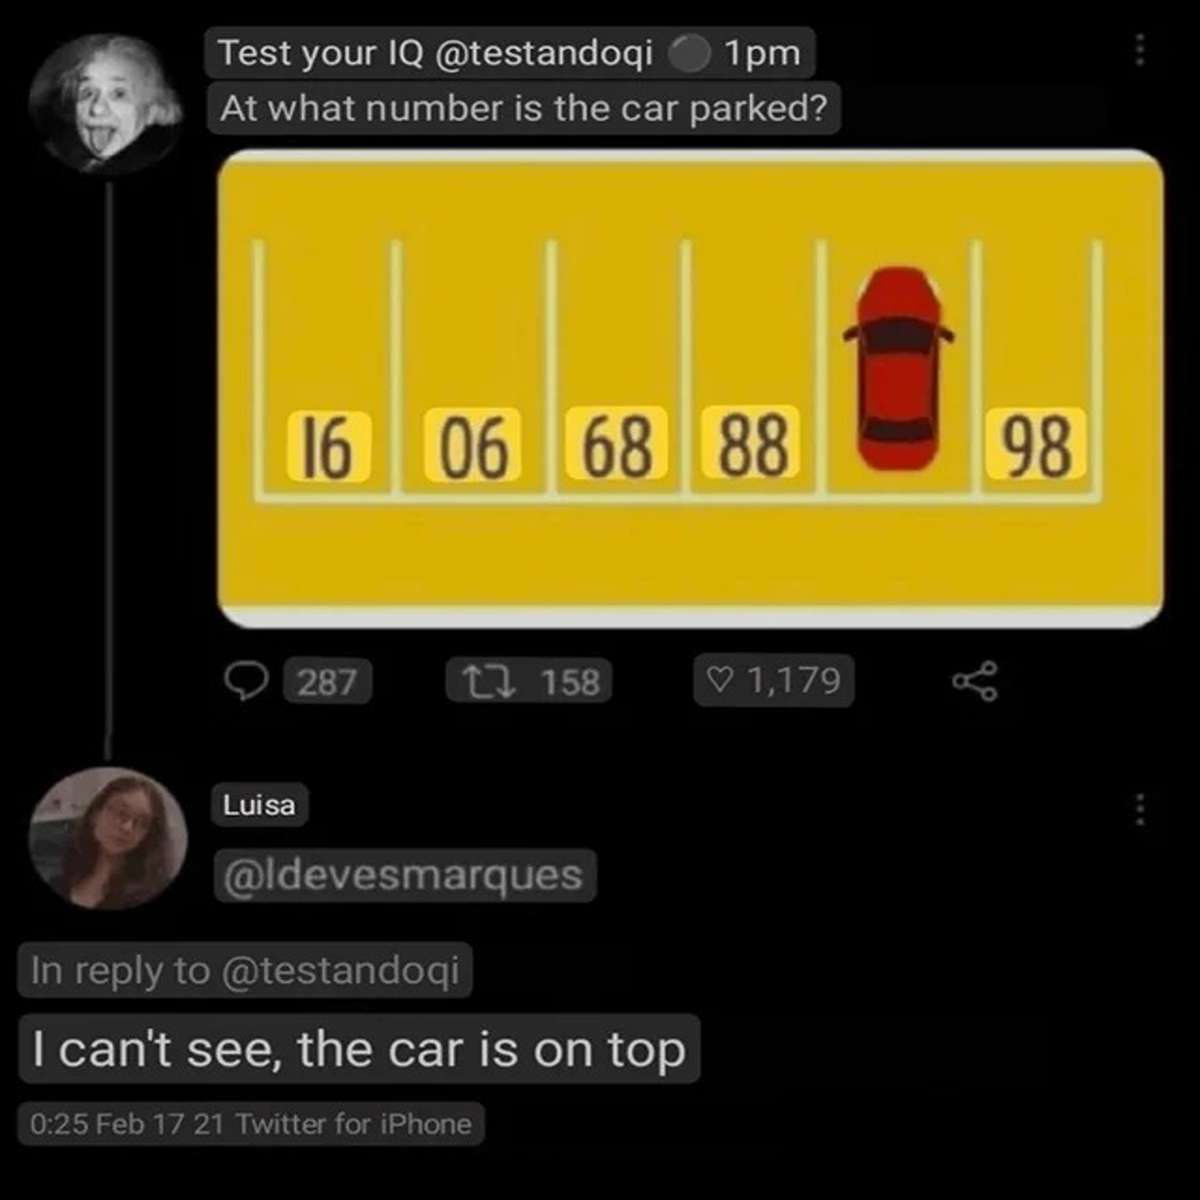 dank memes - multimedia - Test your Iq 1pm At what number is the car parked? 16 06 68 88 287 Luisa 1 158 In to I can't see, the car is on top Feb 17 21 Twitter for iPhone 1,179 98